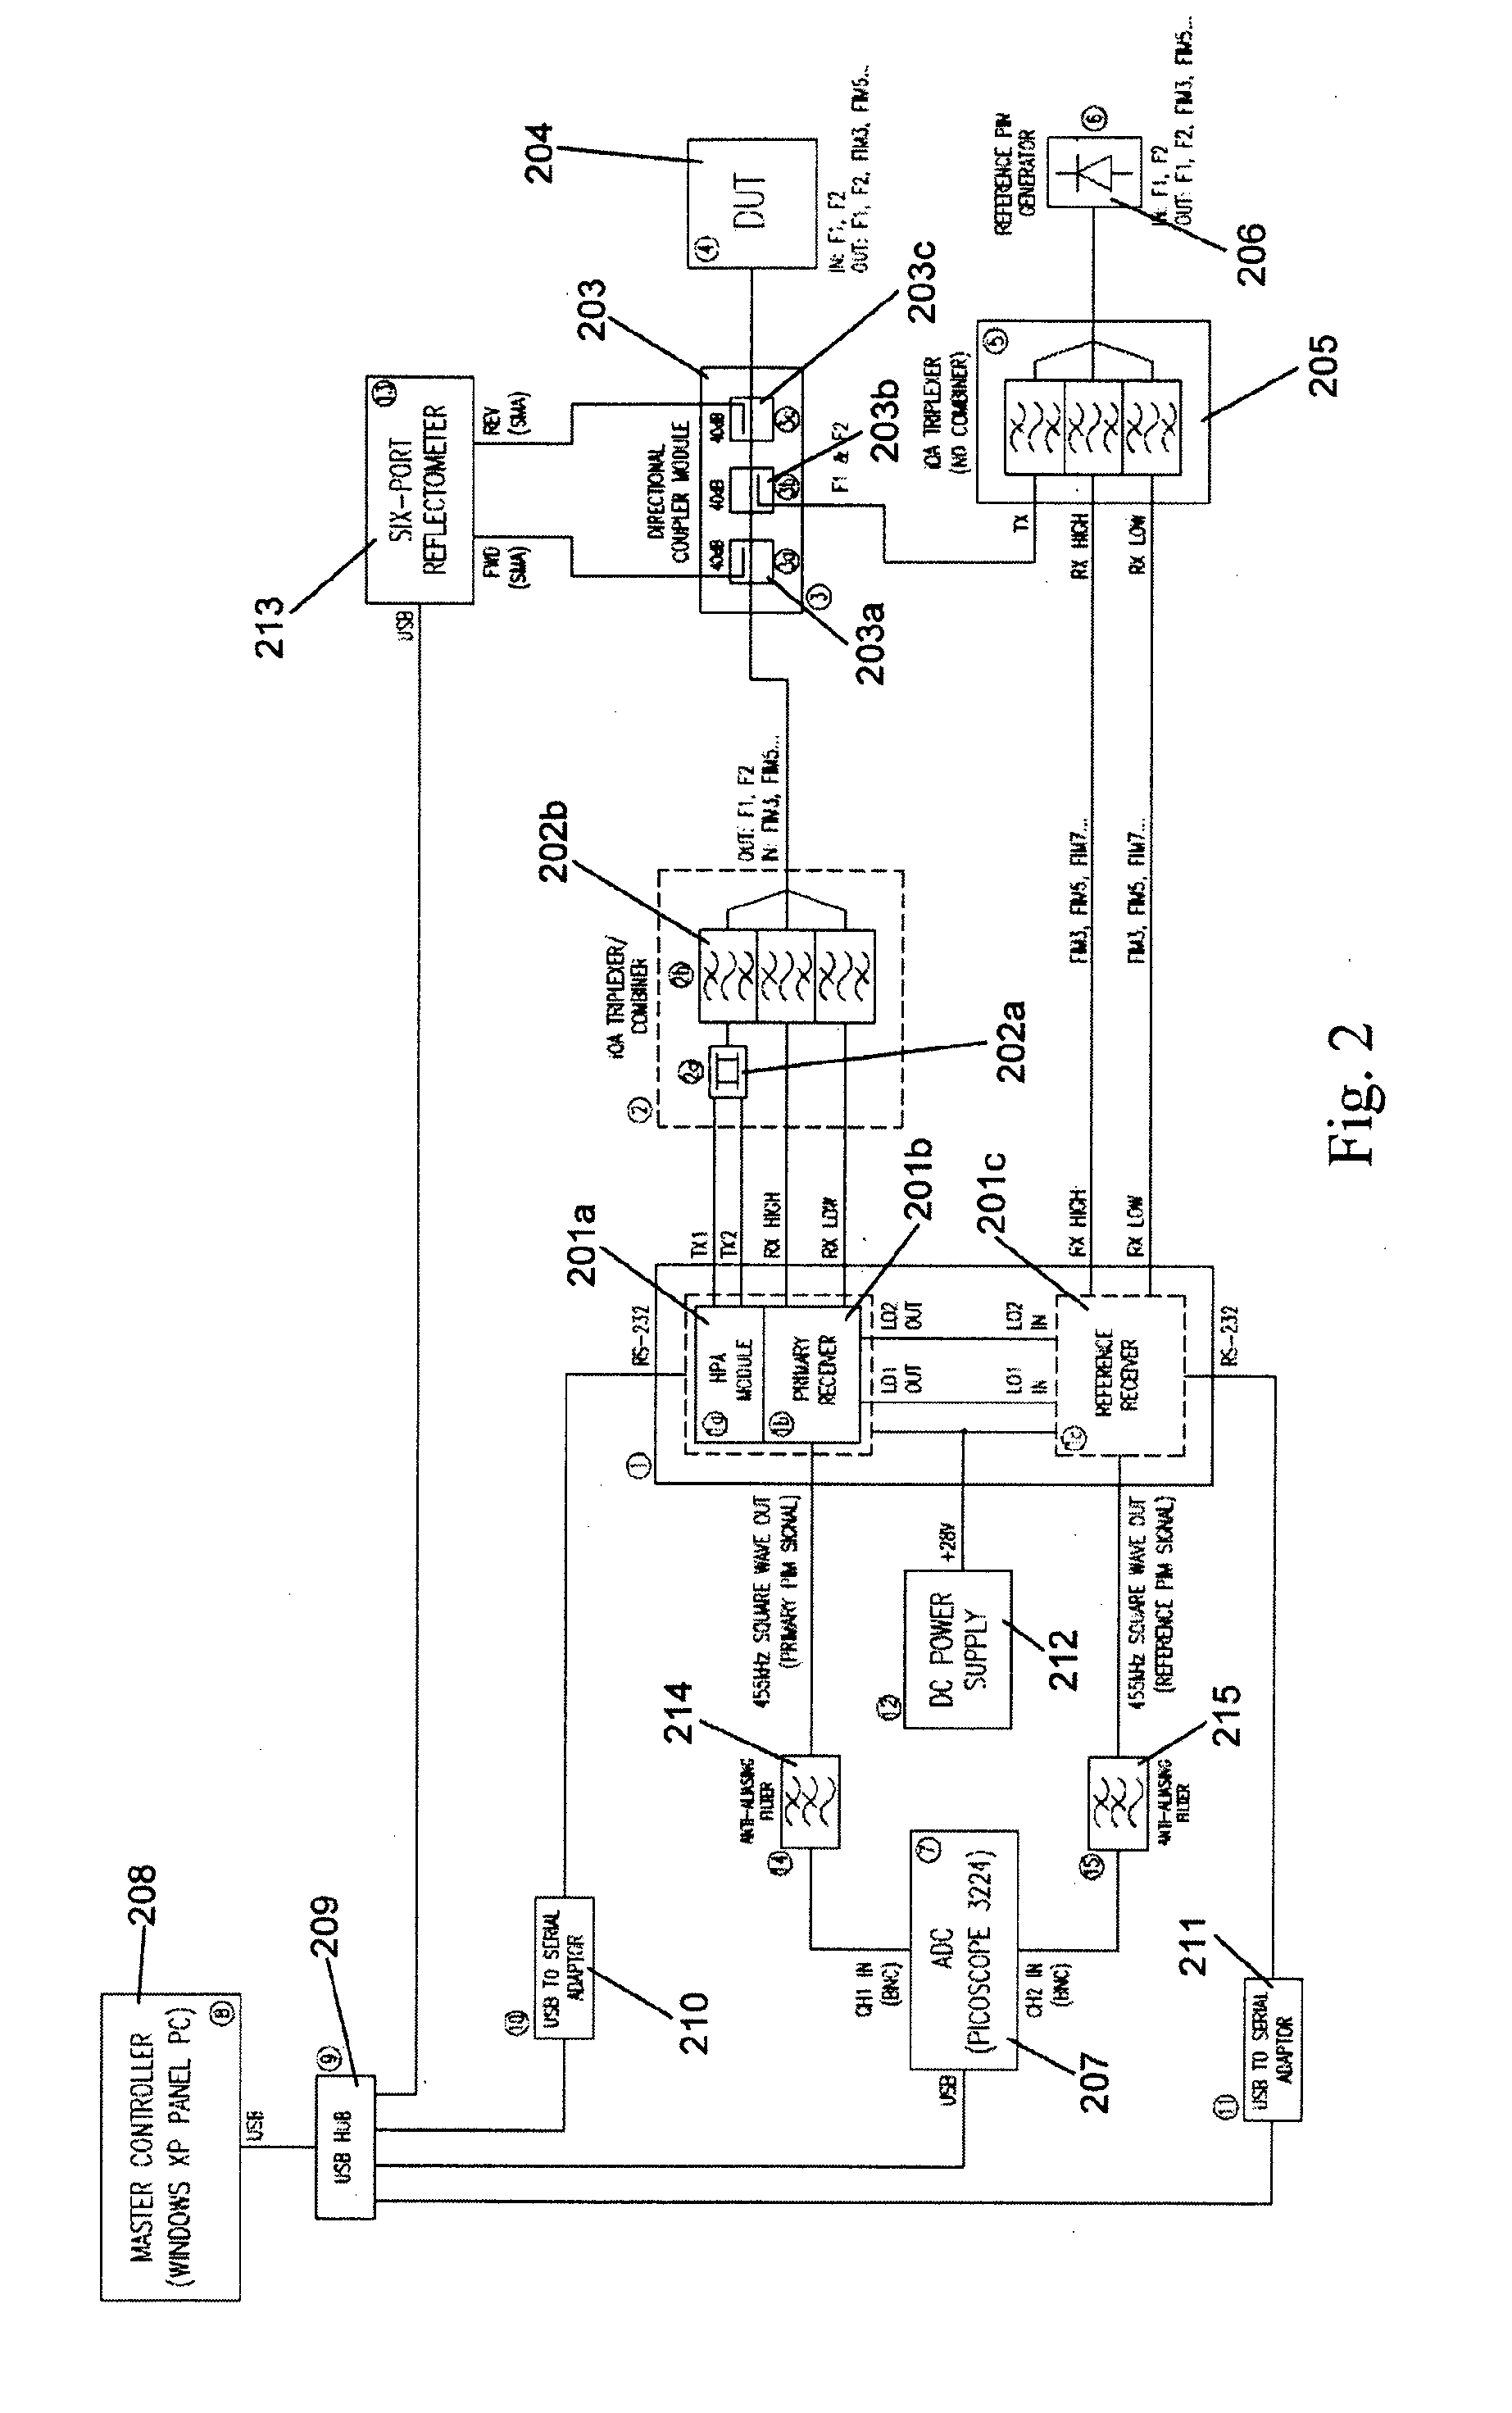 Method and apparatus for locating faults in communications networks